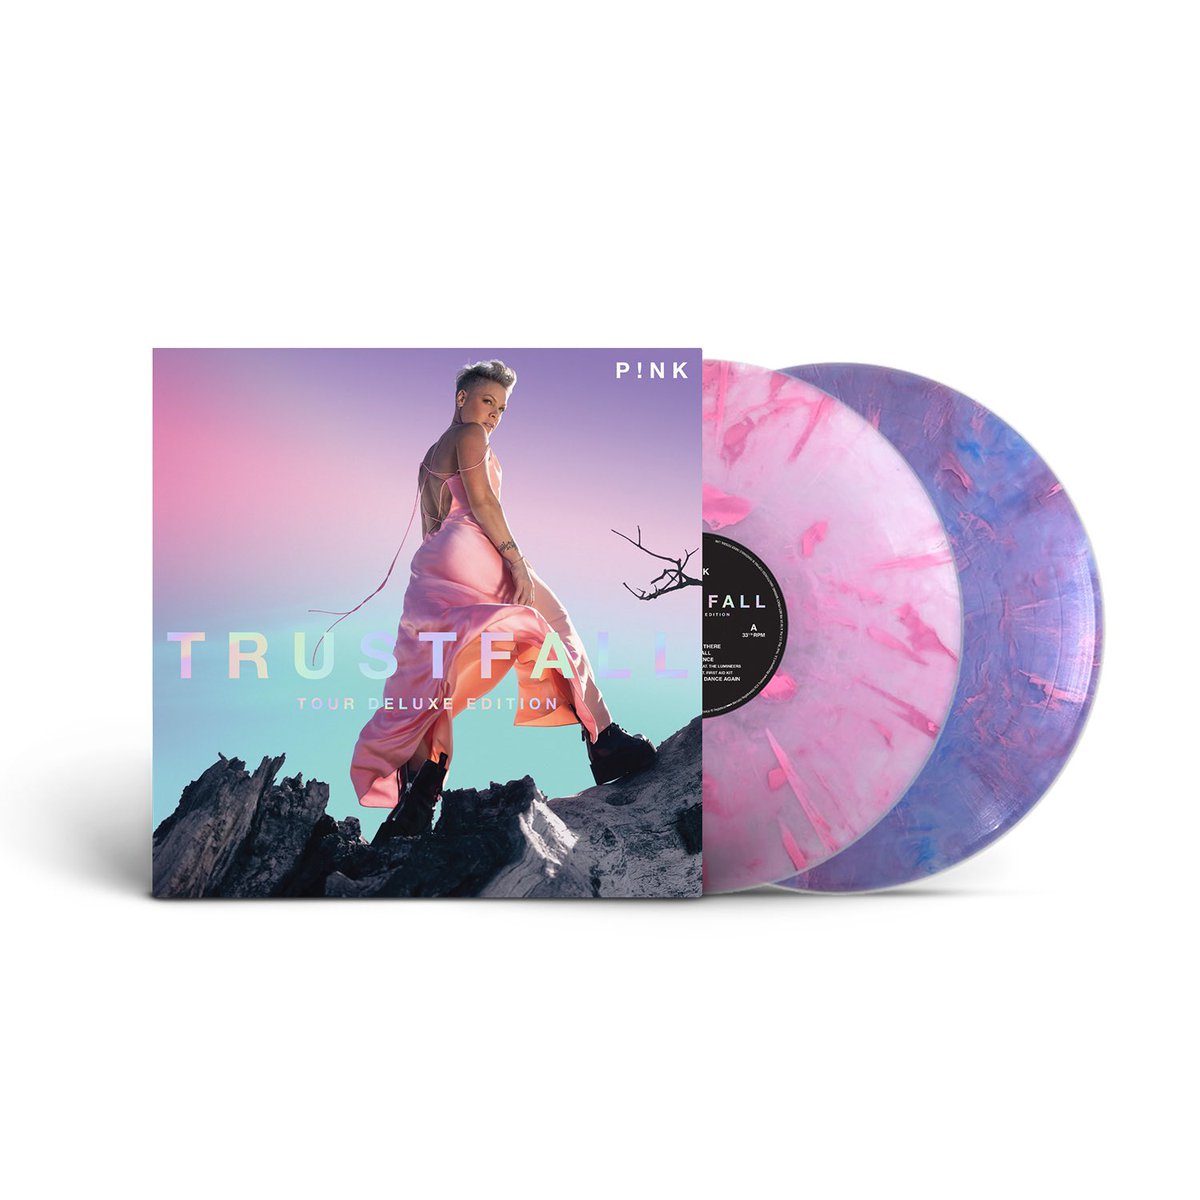 💿 | TRUSTFALL: Tour Deluxe Edition: 1. Dreaming 2. Irrelevant 3. All Out Of Fight 4. Just Like Fire/Heartbreaker (Live) 5. When I Get There (Live) 6. Nothing Compares 2 U ft Brandi Carlile [Live] 7. No Ordinary Love (Live) 8. Cover Me in Sunshine (Live) 9. What About Us (Live)